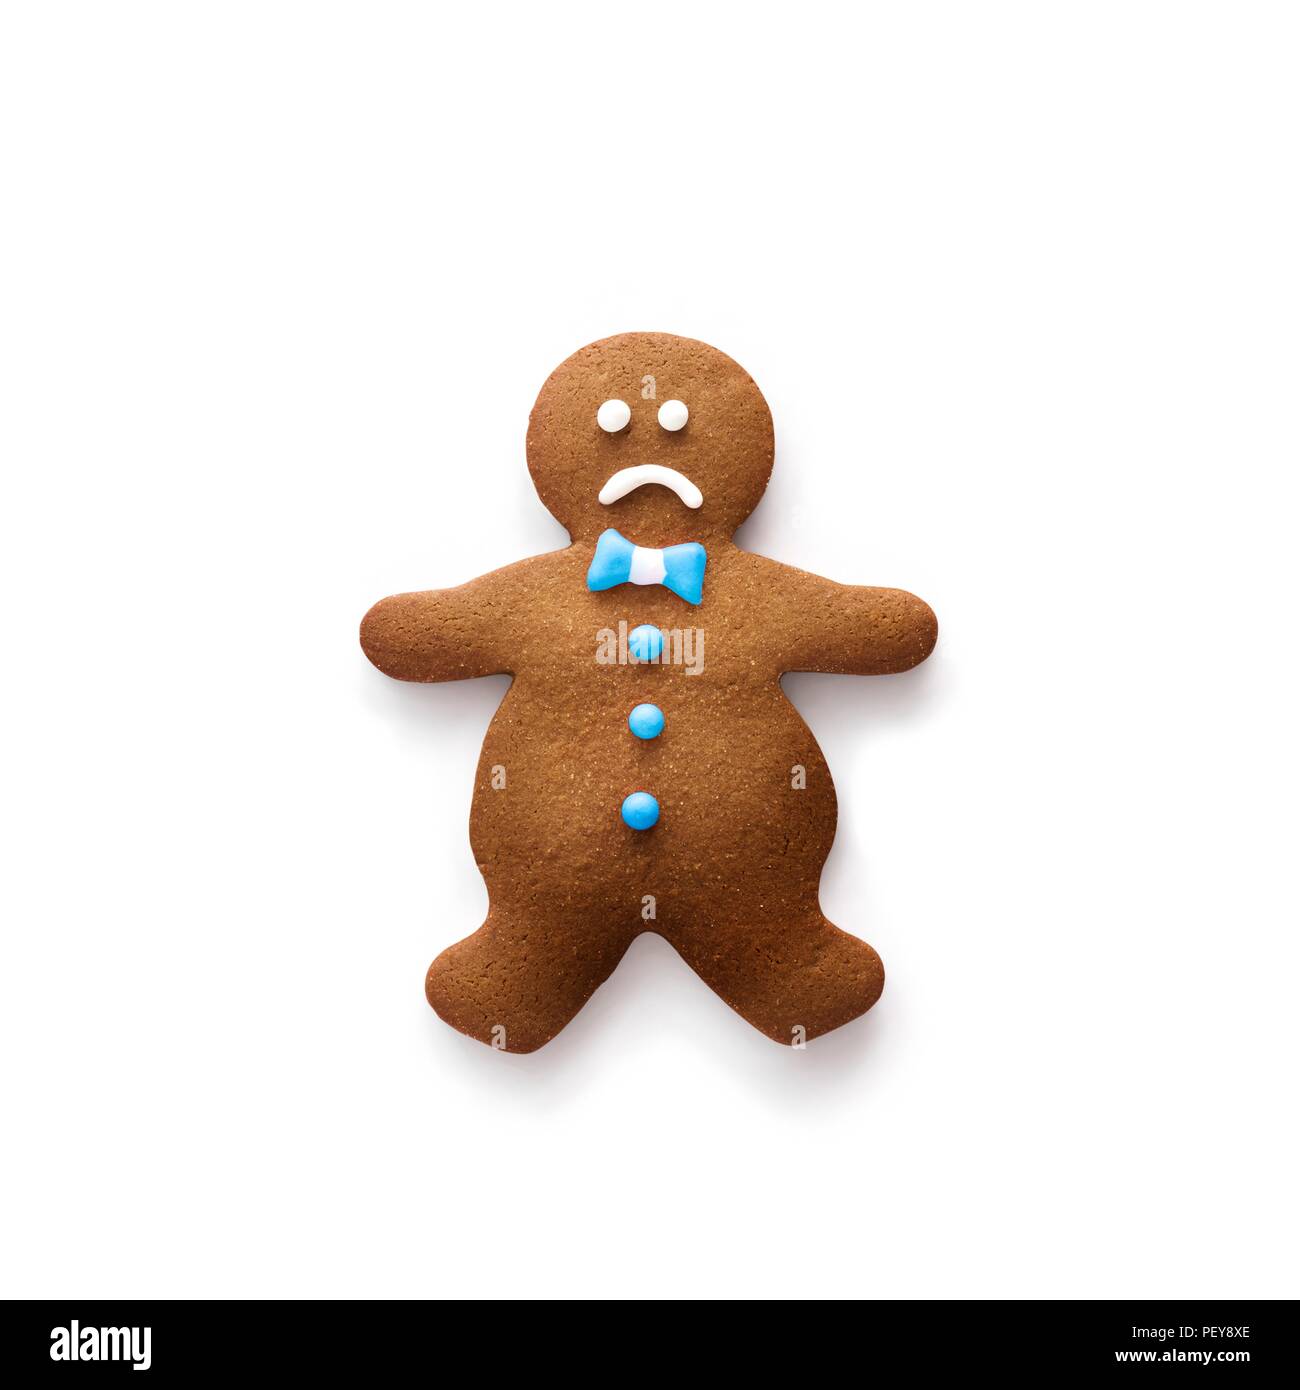 Obese gingerbread man. Stock Photo